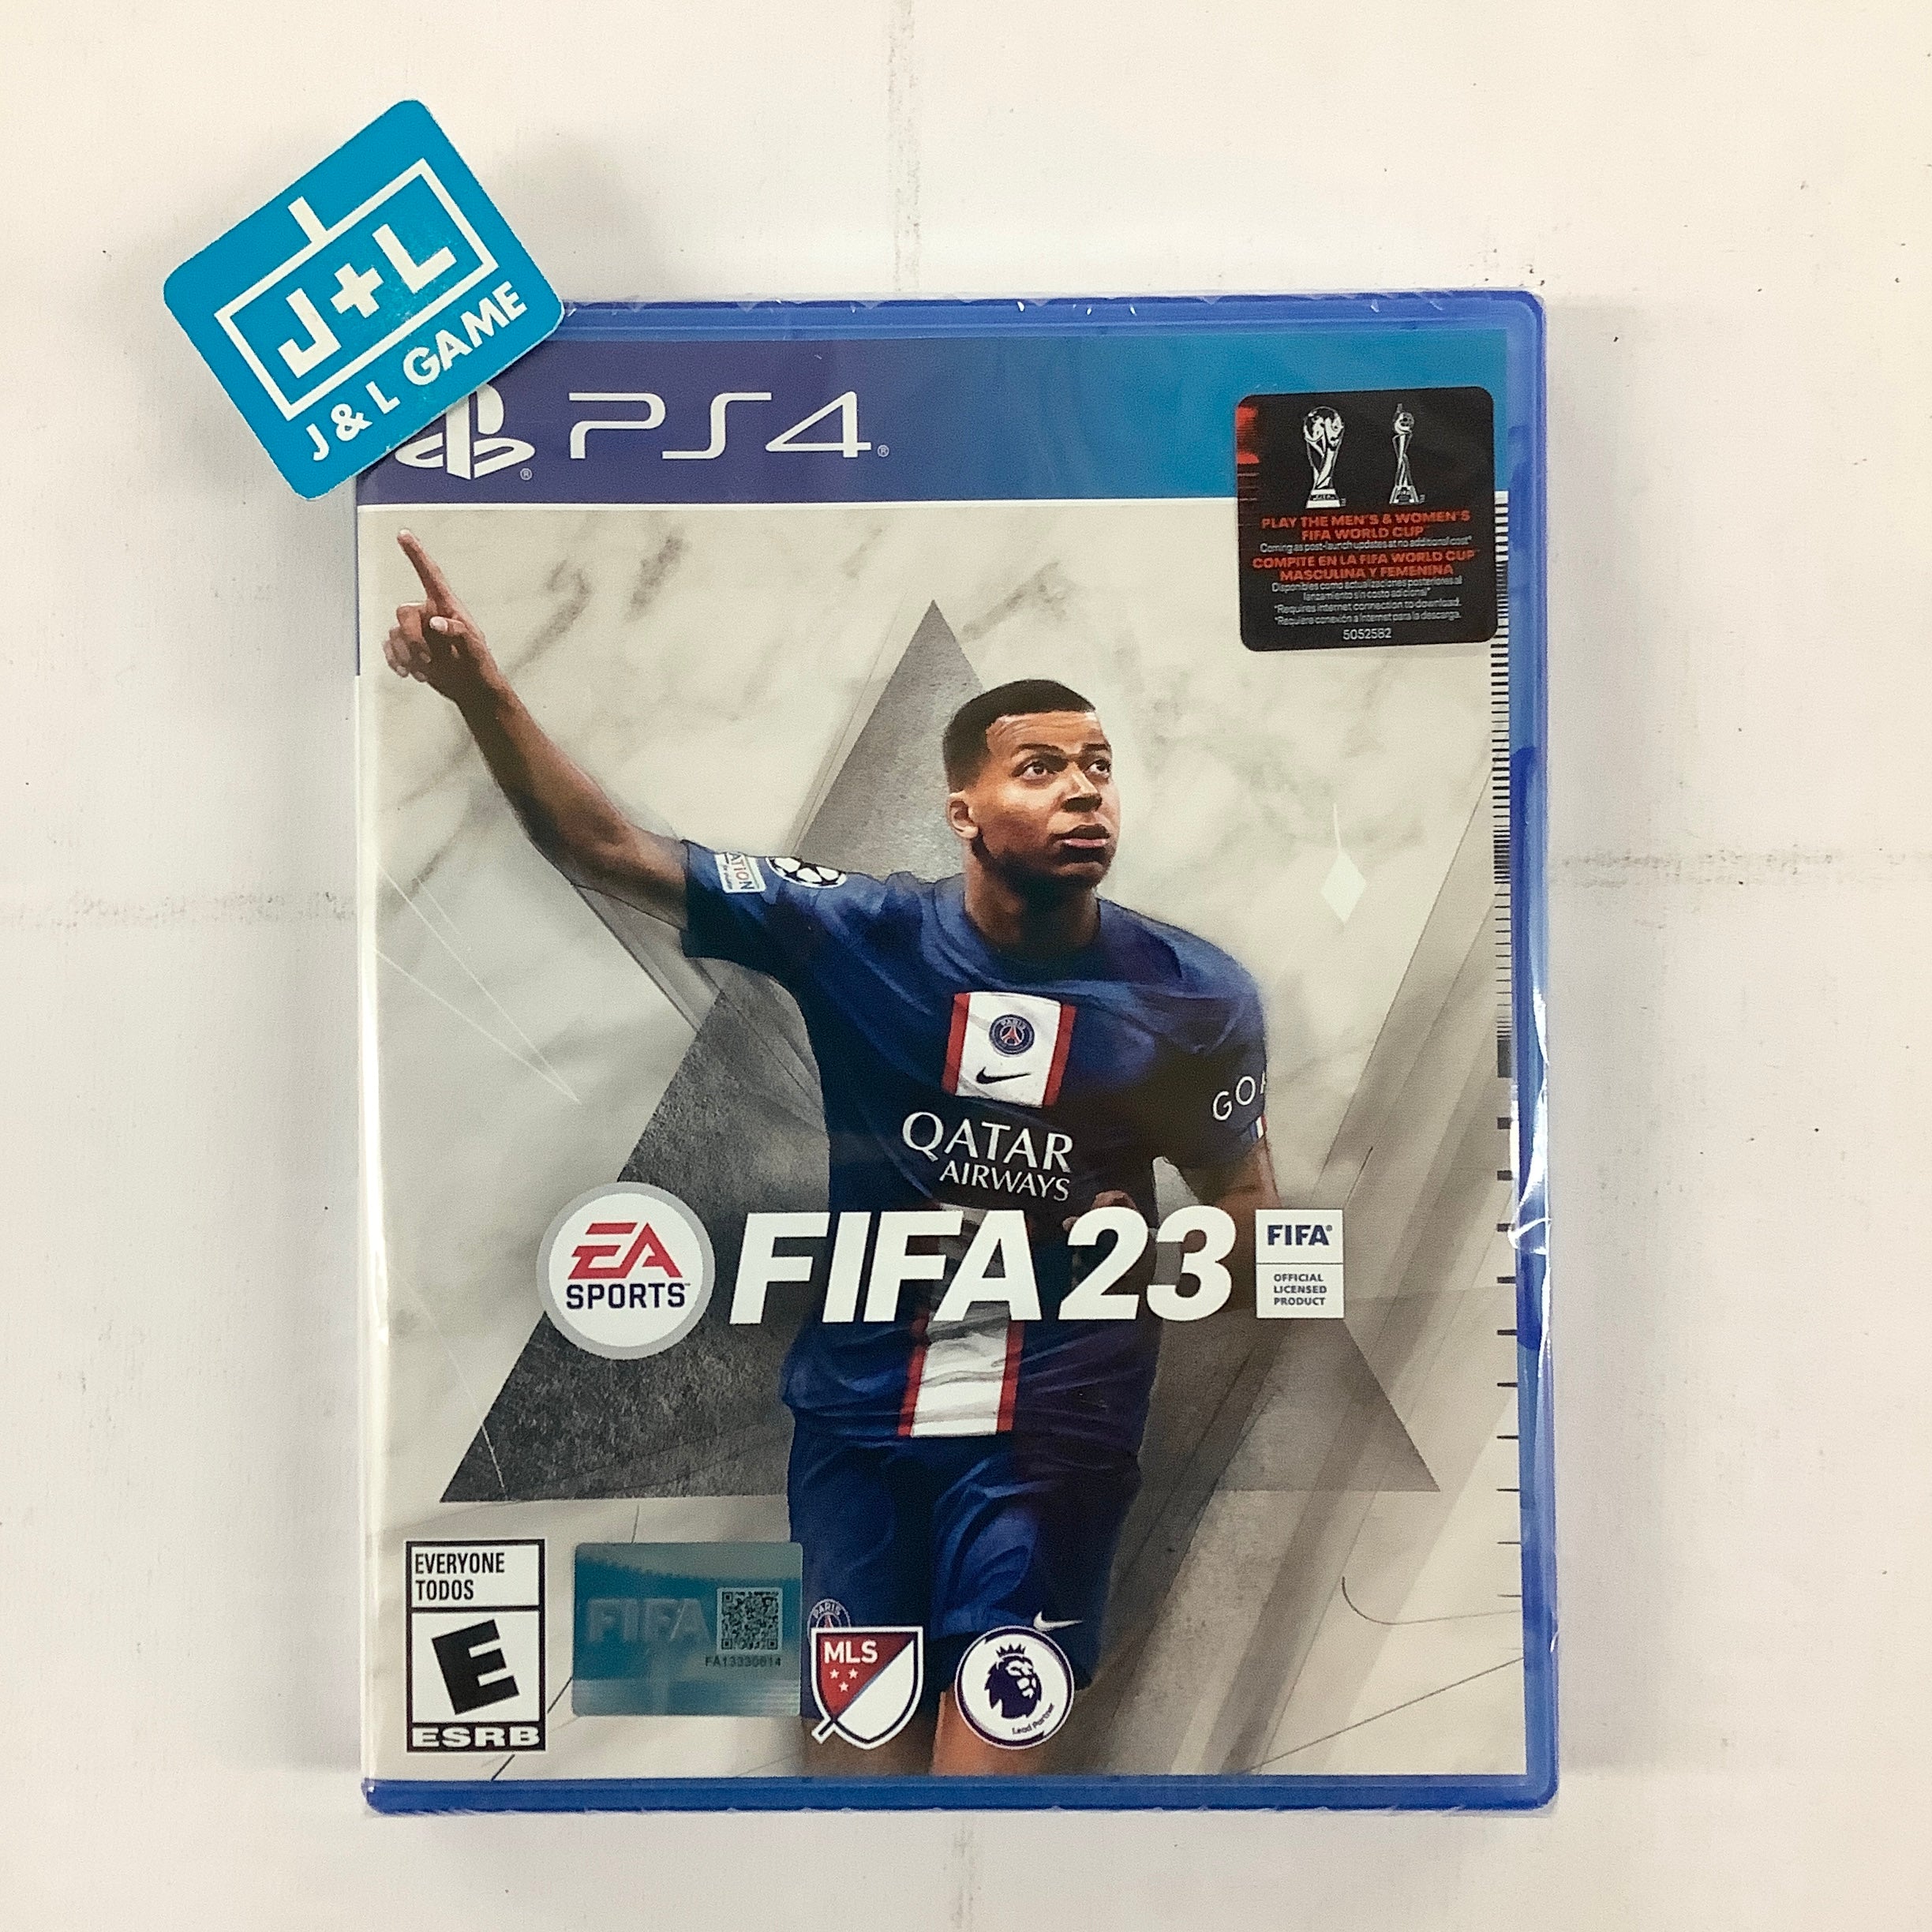 FIFA 23 - (PS4) PlayStation 4 Video Games Electronic Arts   